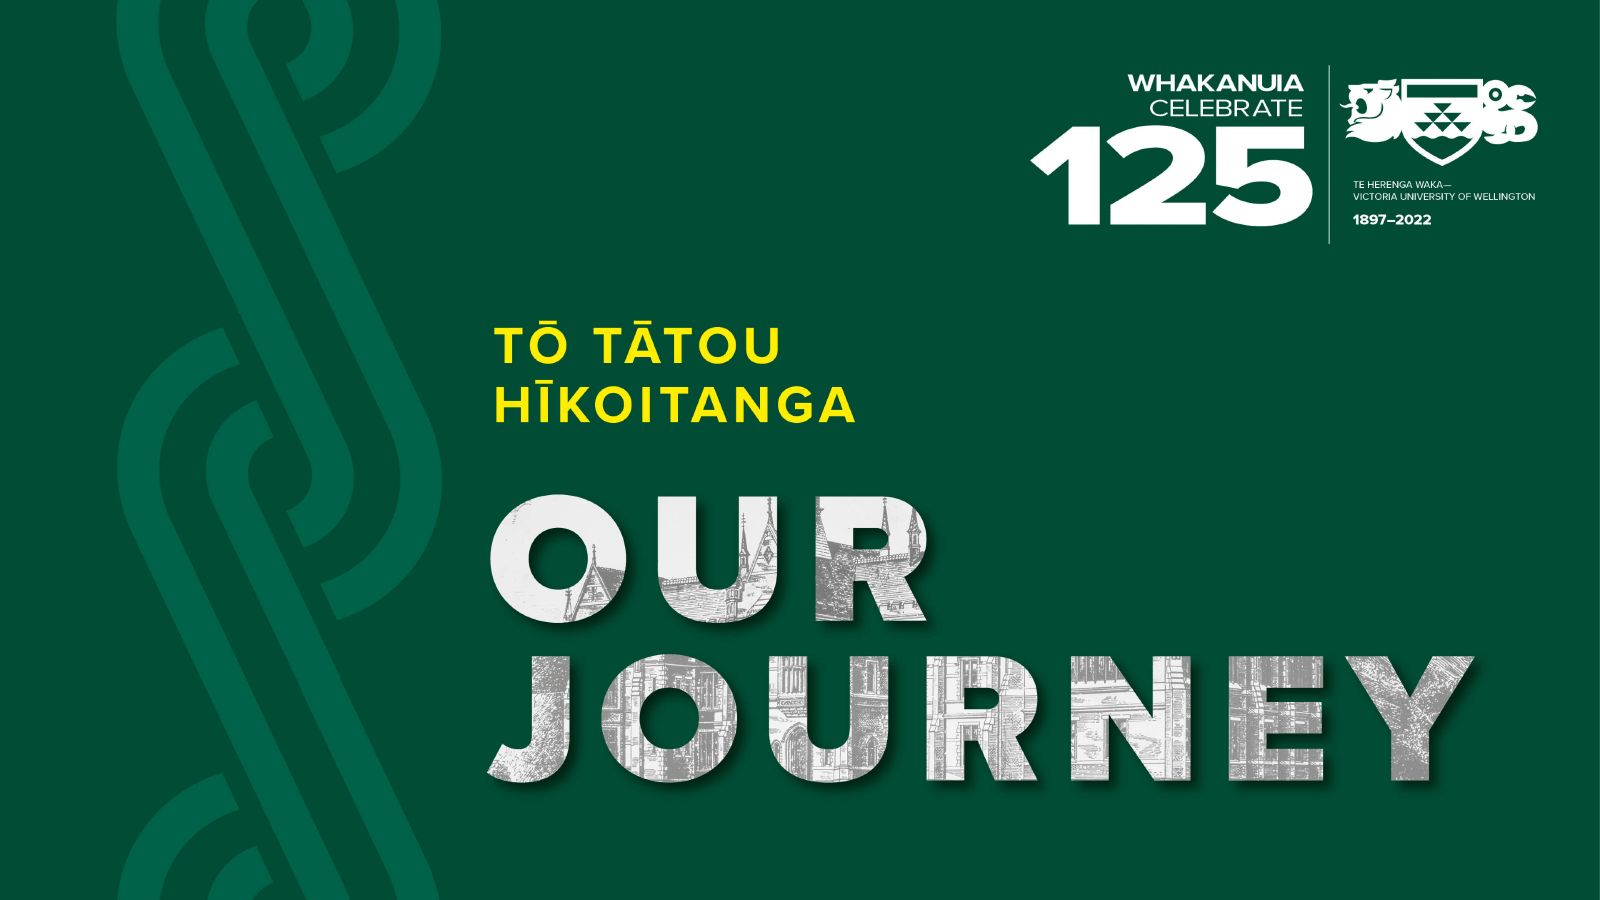 A banner image for the University's 125th anniversary featuring the words 'To Tatou Hikoitanga - Our Journey' on a green background.